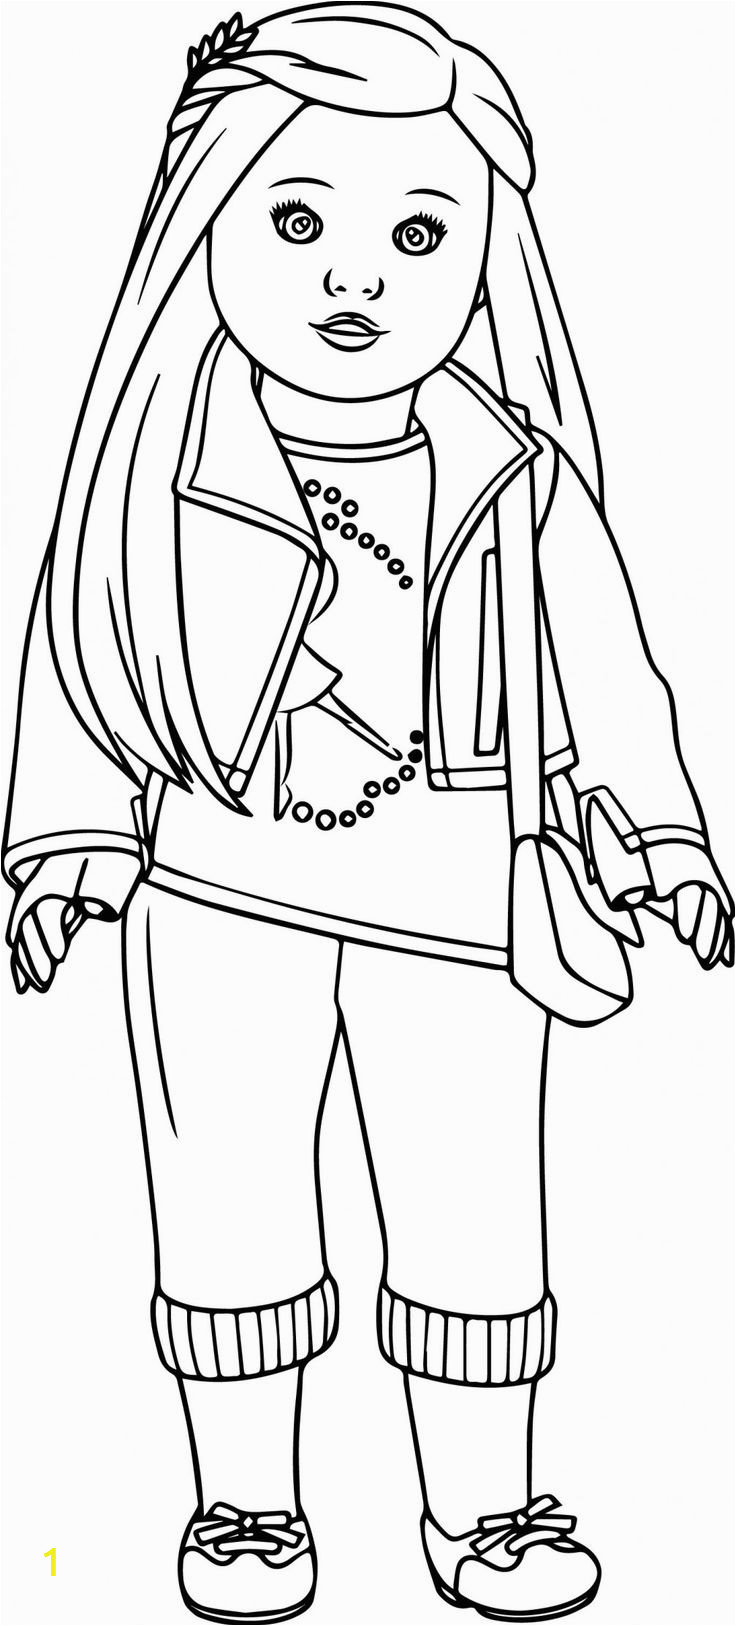 American Girl Doll Coloring Pages to Print American Doll Coloring Pages Coloringsuite